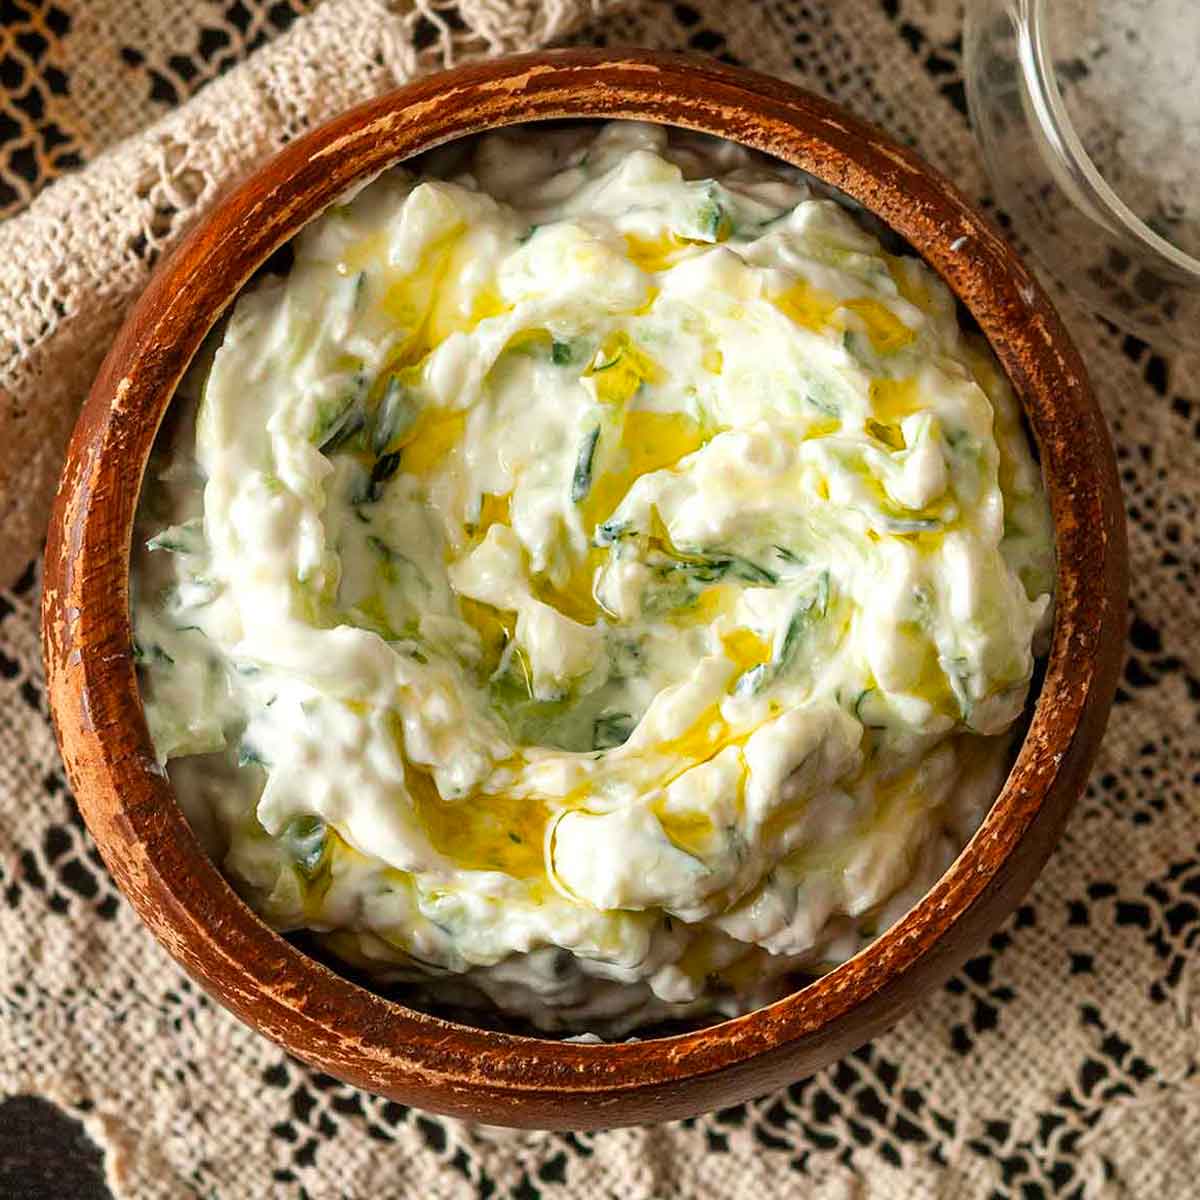 A bowl of tzatziki, drizzled with olive oil, on a lace tablecloth.